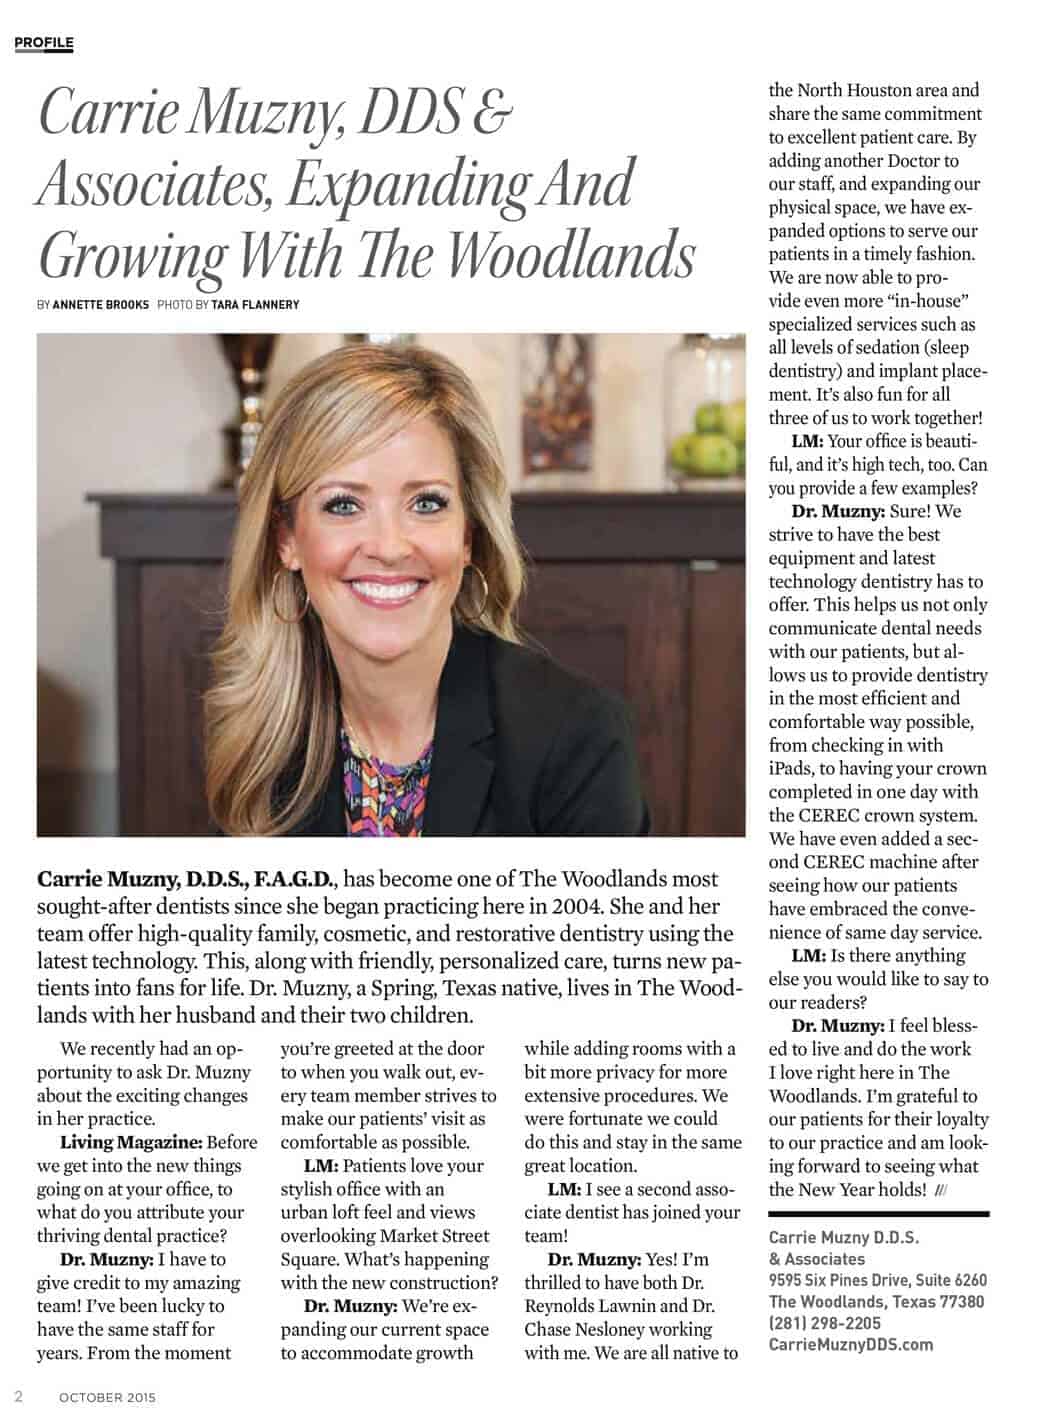 Carrie Muzny DDS in Living Magazine featured